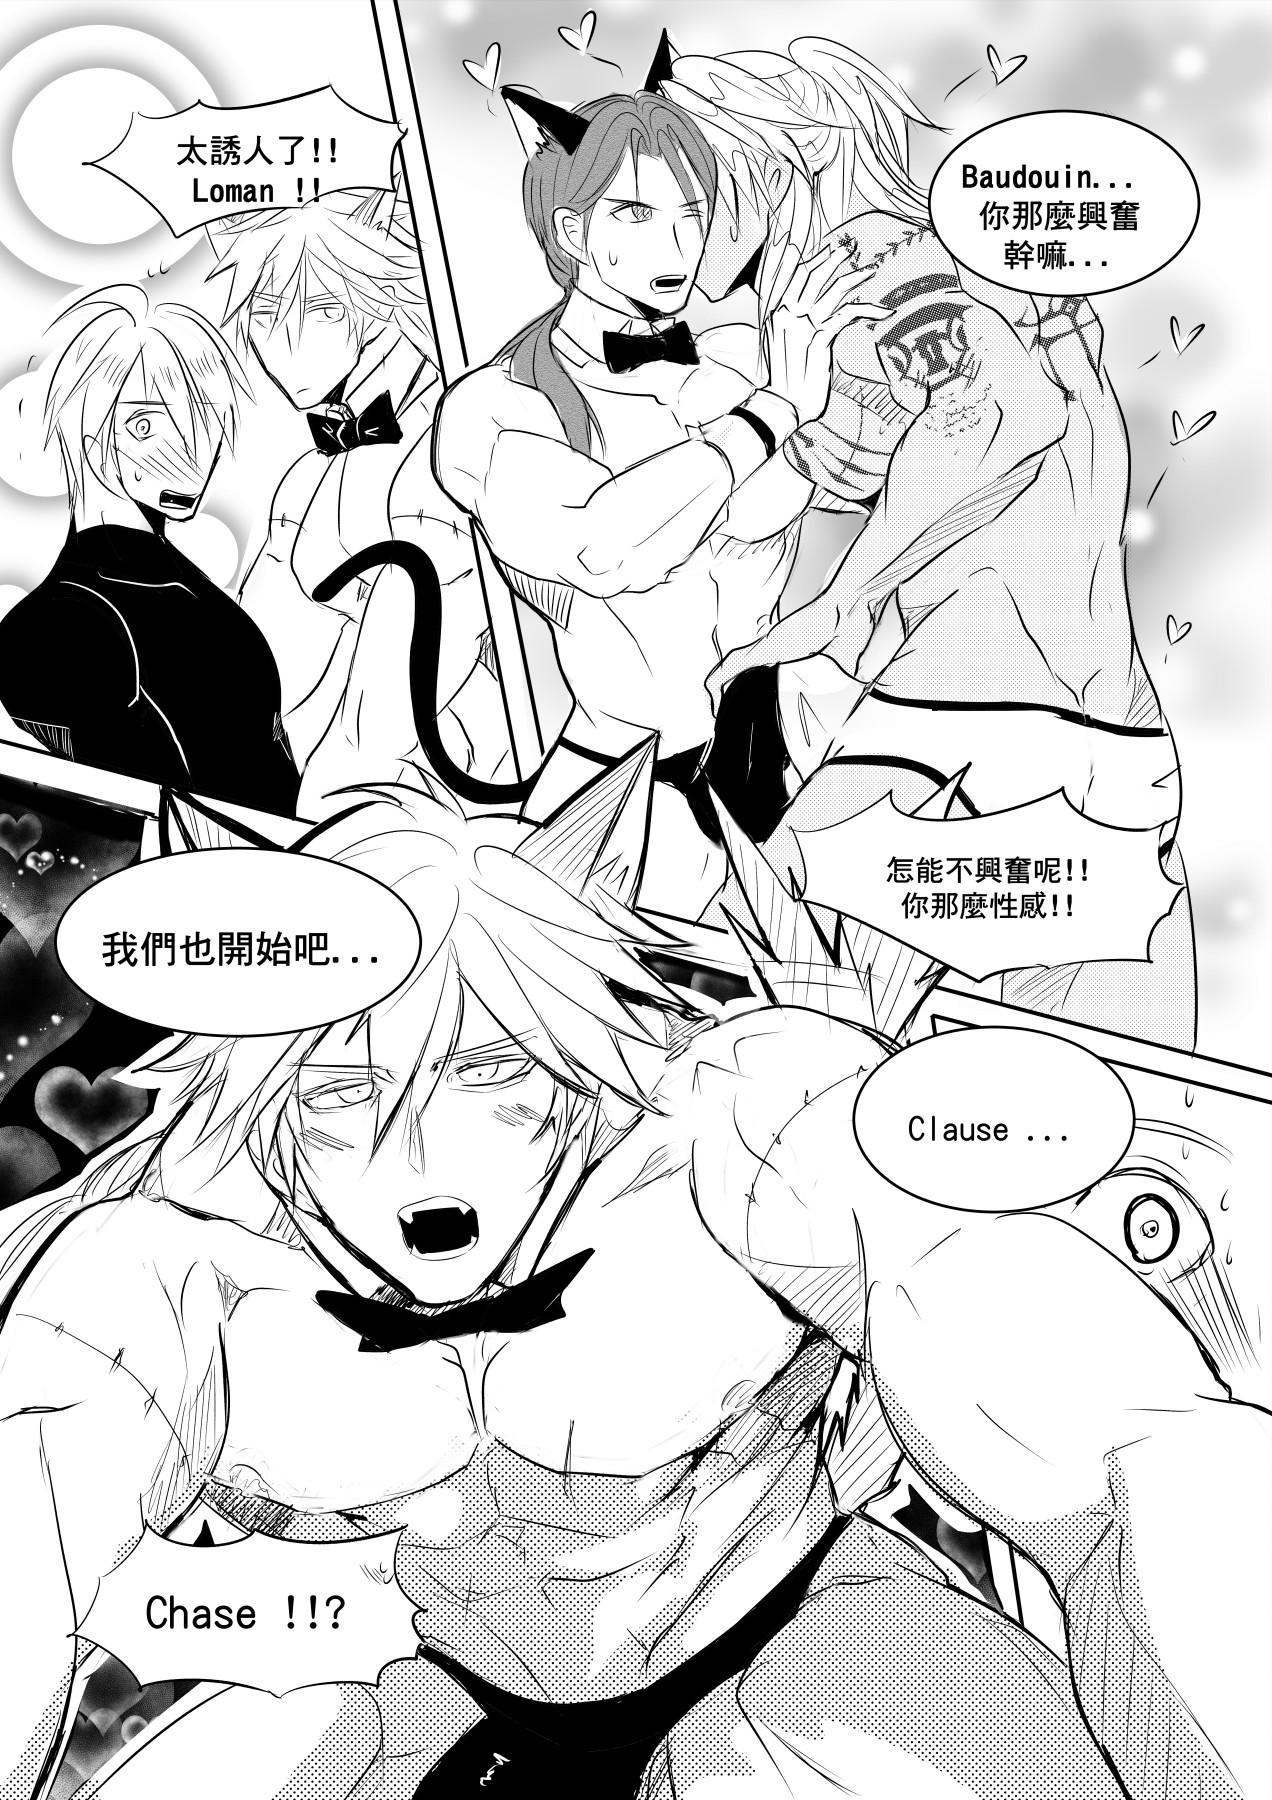 Best Blowjob Ever at your service - Kings raid Wild - Page 8